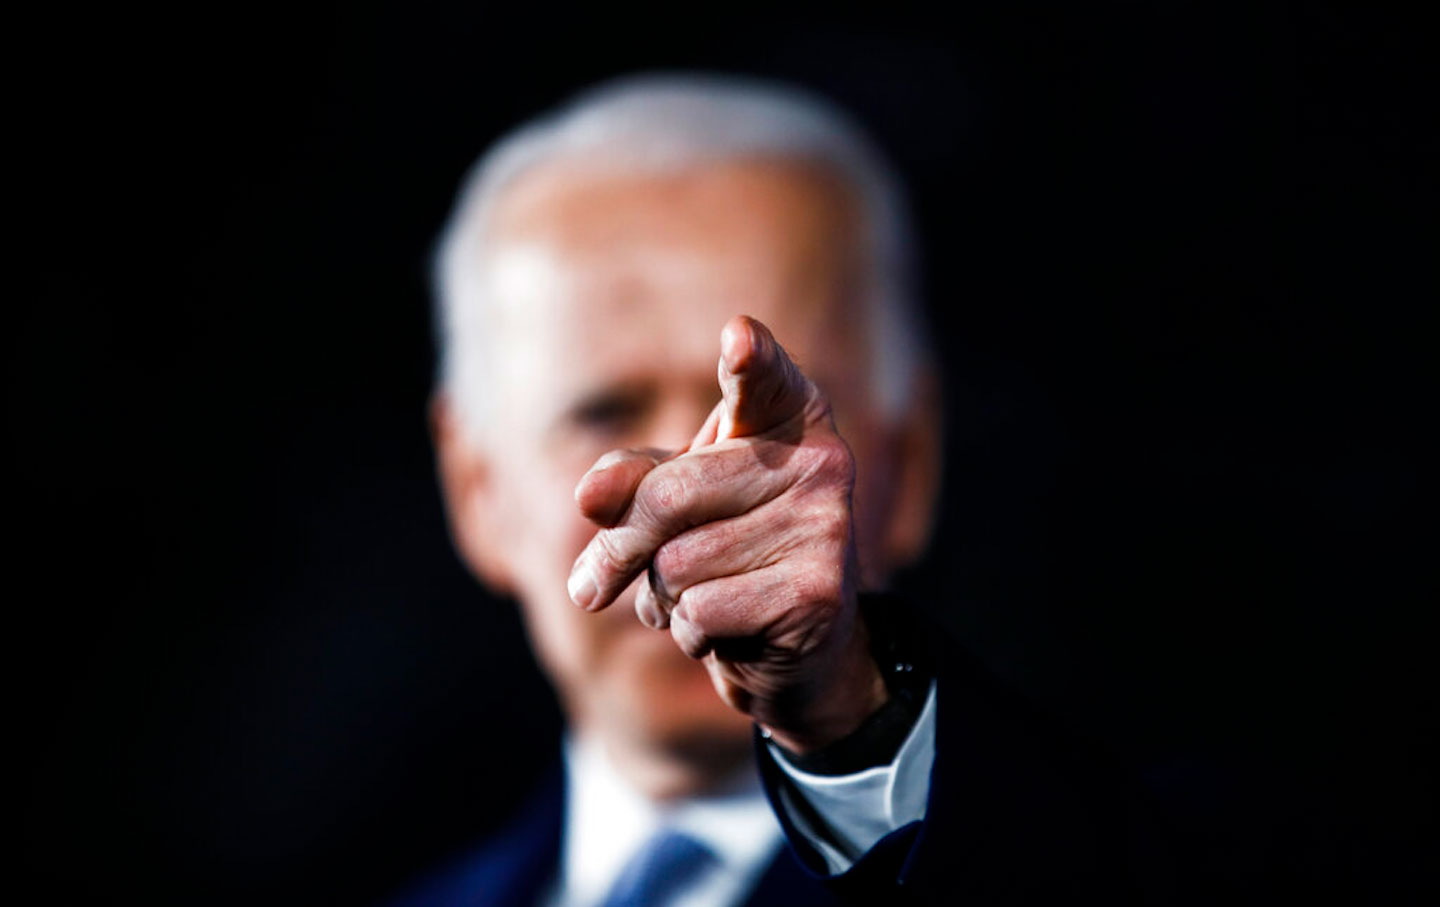 Democratic presidential candidate former vice president Joe Biden speaks at a primary night election rally in Columbia, South Carolina, Saturday, February 29, 2020.